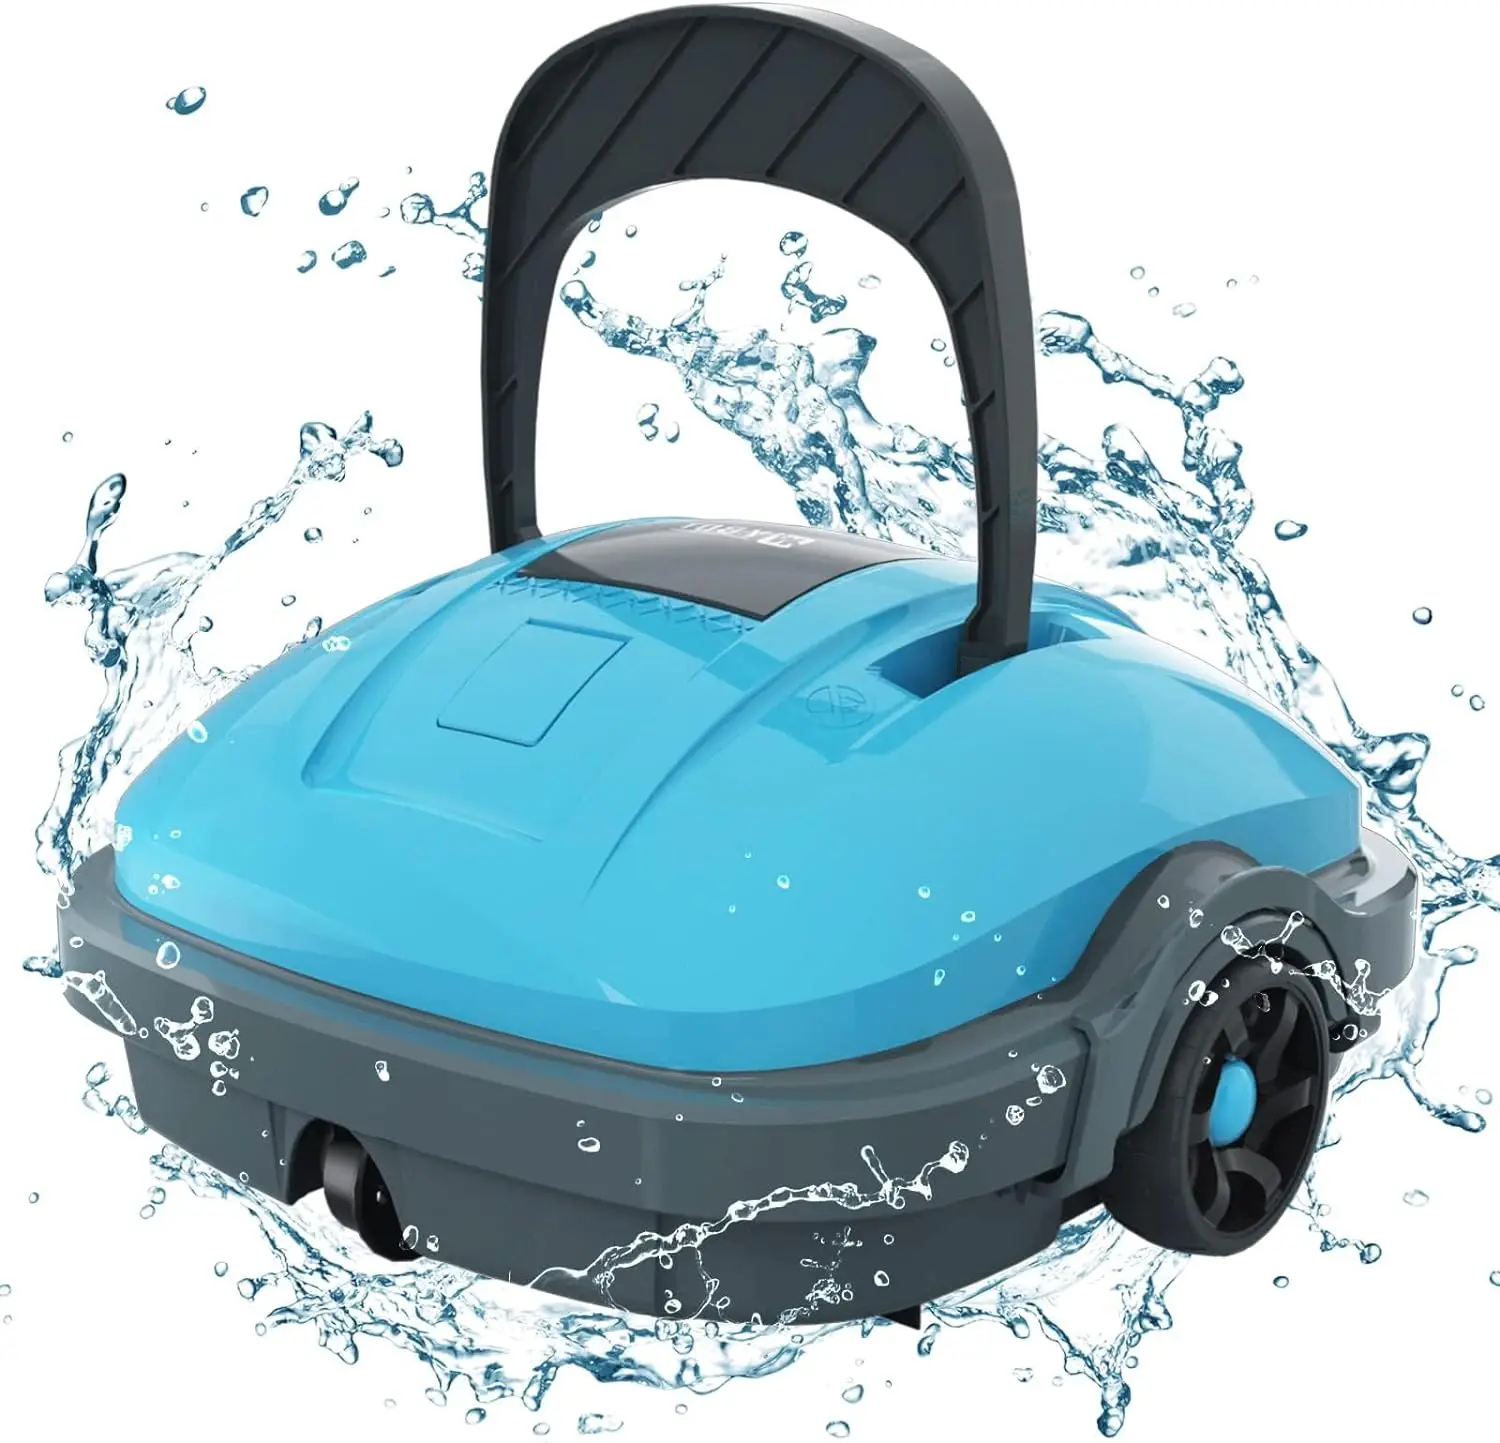 

Cordless Robotic Pool Cleaner, Automatic Pool Vacuum, Powerful Suction, for Above/In Ground Flat Pool Up to 525 Sq.Ft -Osprey200